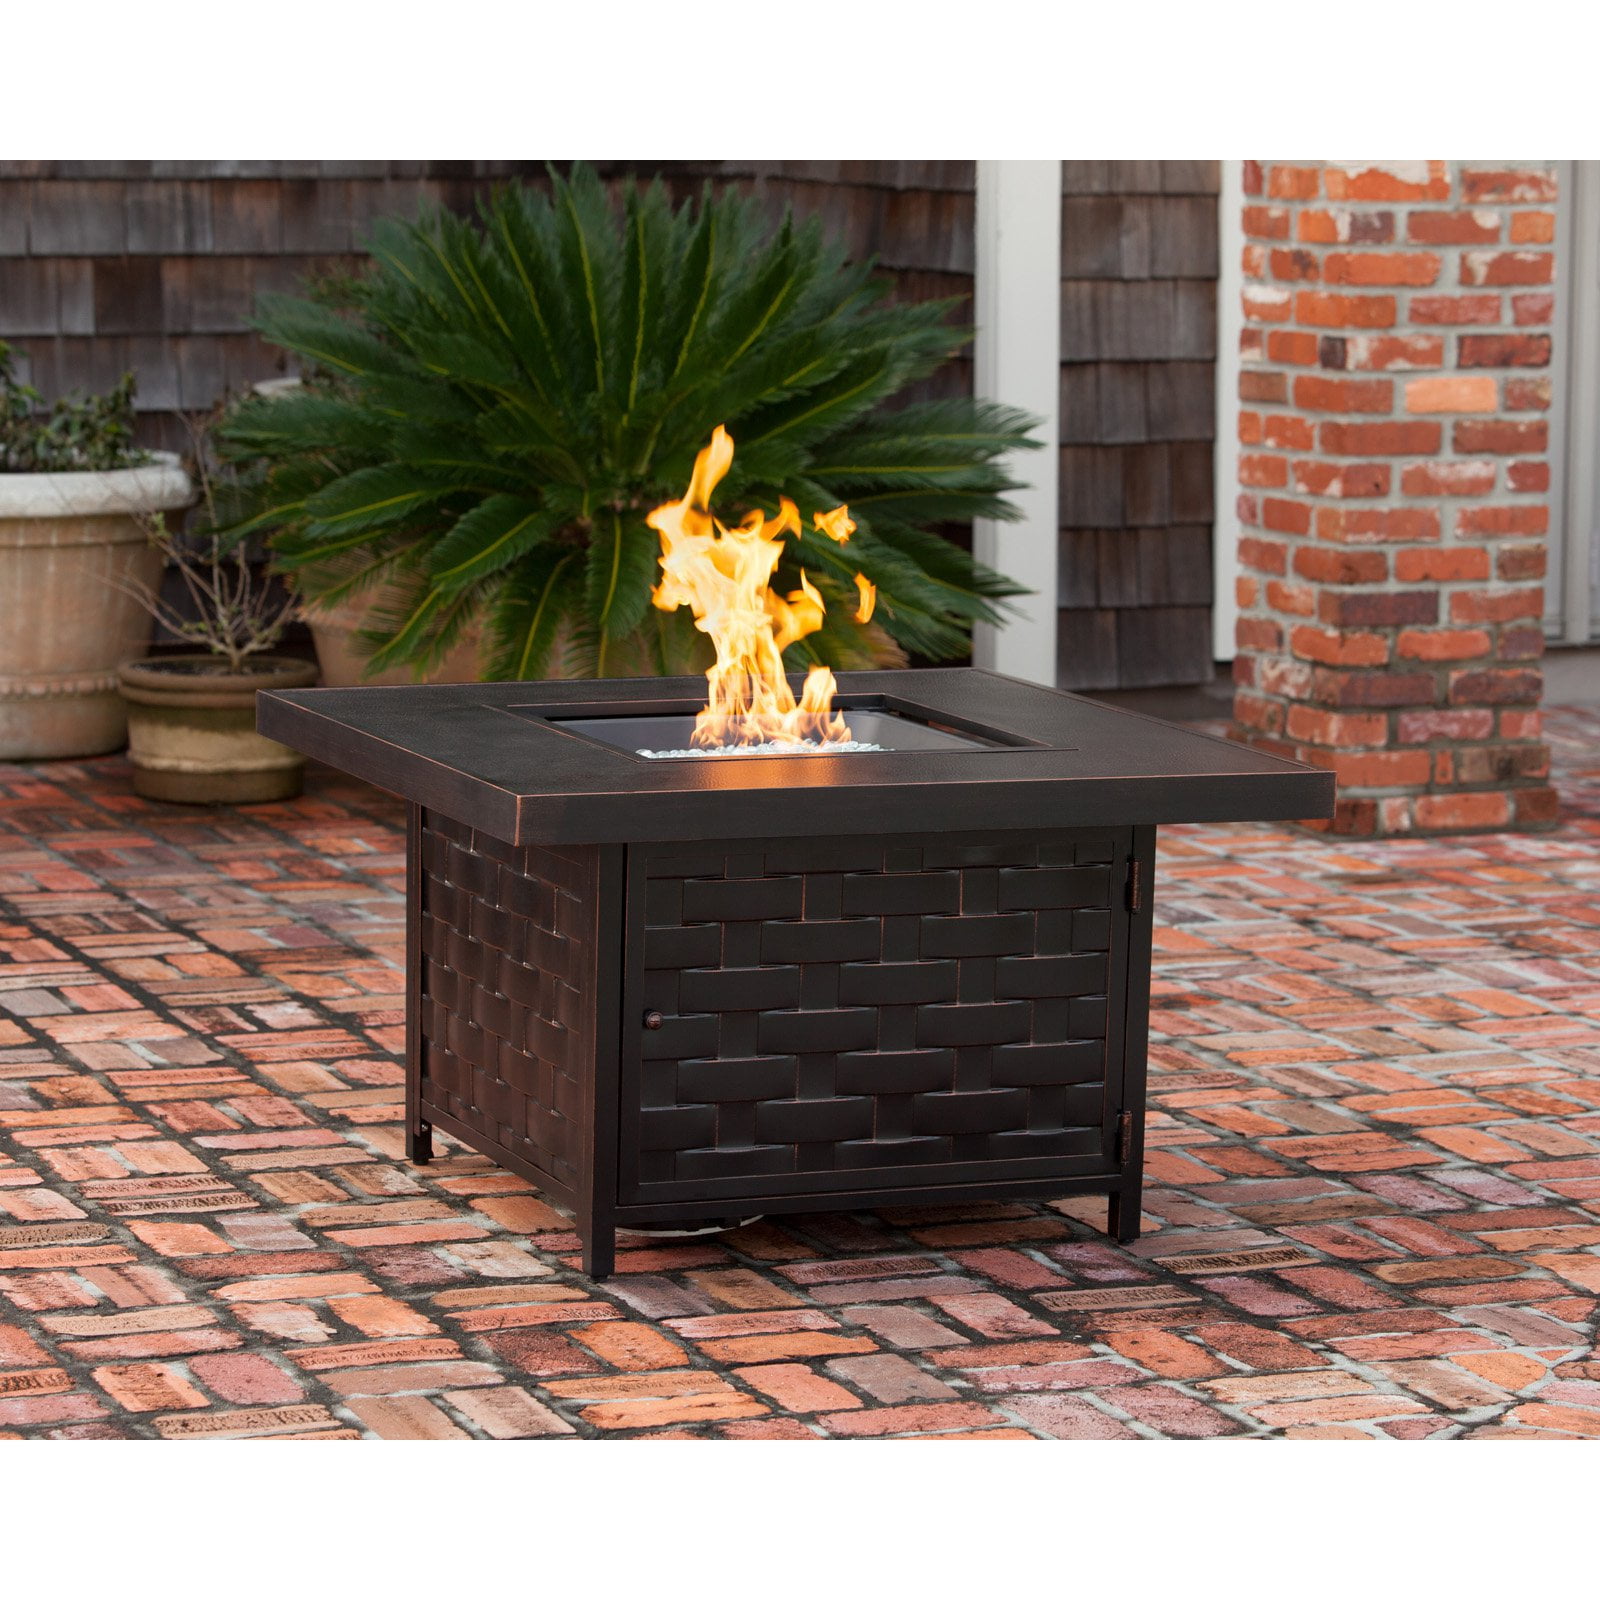 Axxonn 34 Inch Tuscan Ceramic Outdoor Tile Top Fire Pit Black Antique Bronze for sale online 